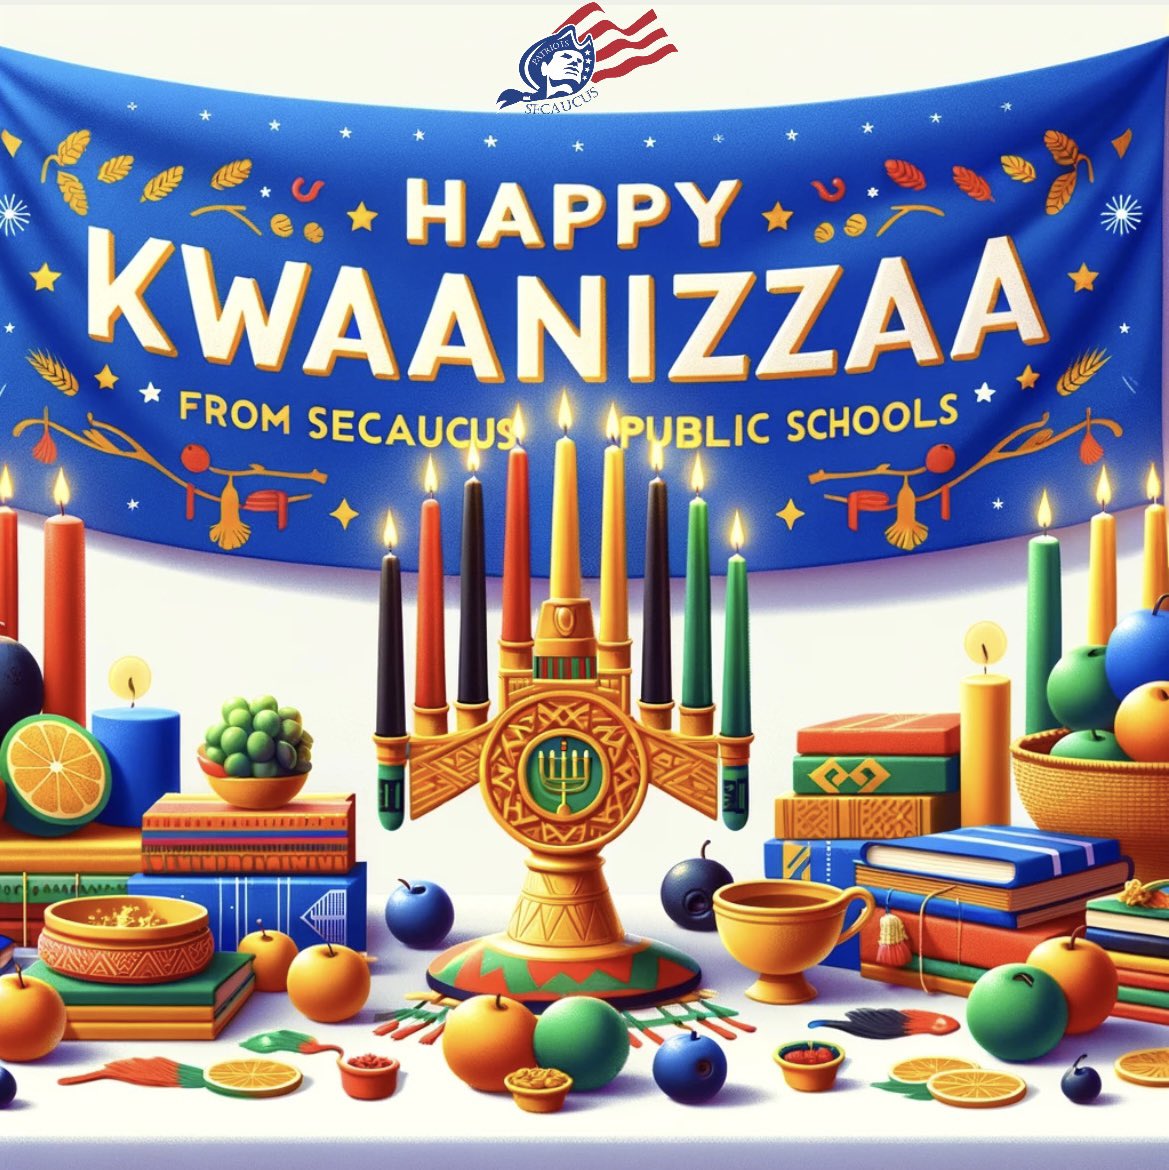 Happy Kwanzaa! Secaucus Public Schools embraces the seven principles of this vibrant tradition. May your homes be filled with joy and unity during this festive season. @SecaucusPSD #HappyKwanzaa #Community #CelebrateHeritage